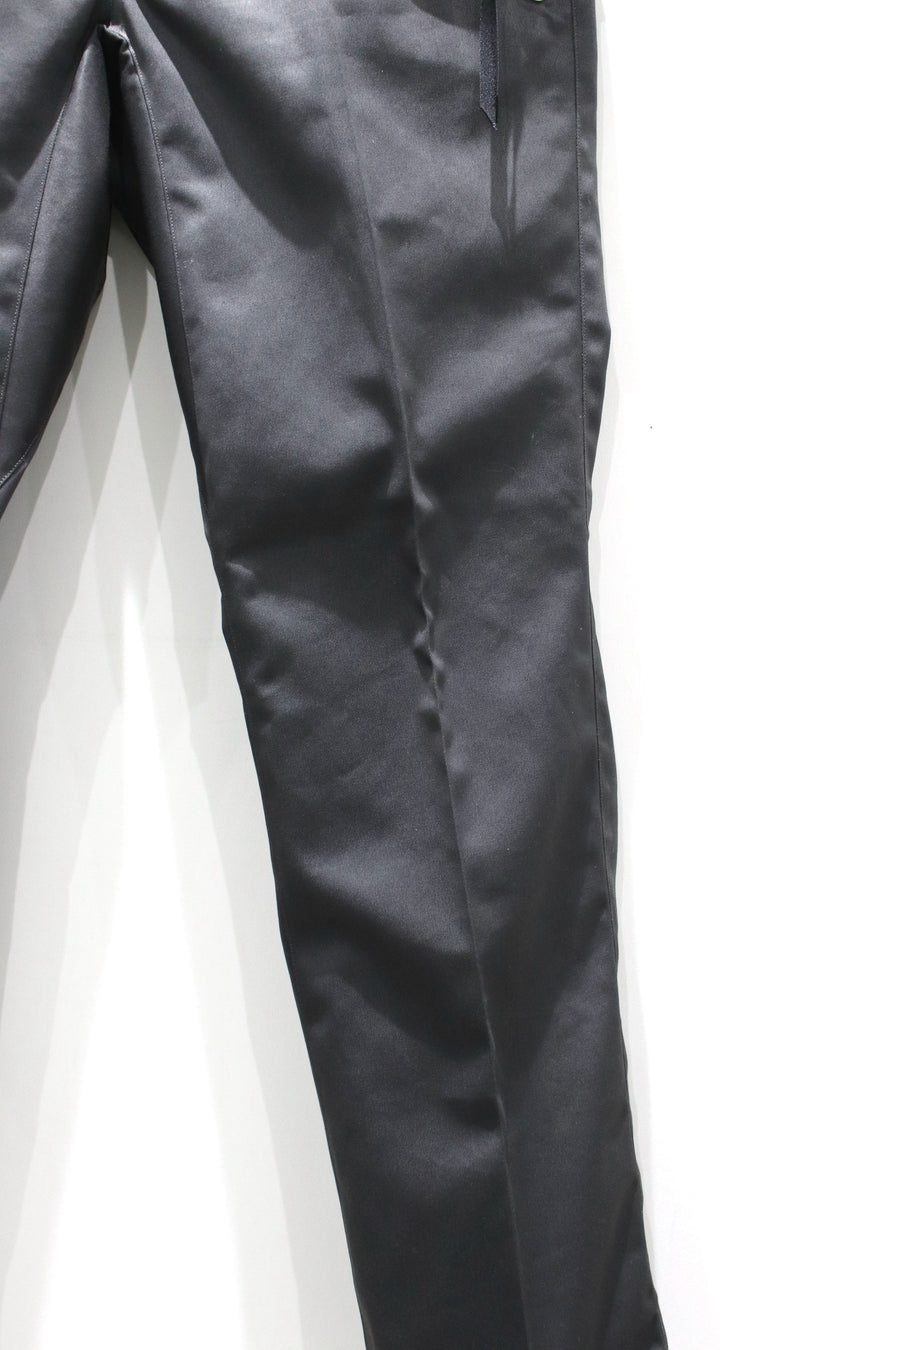 NULABEL  WORK DRESS TROUSERS-2(STAINLESS)